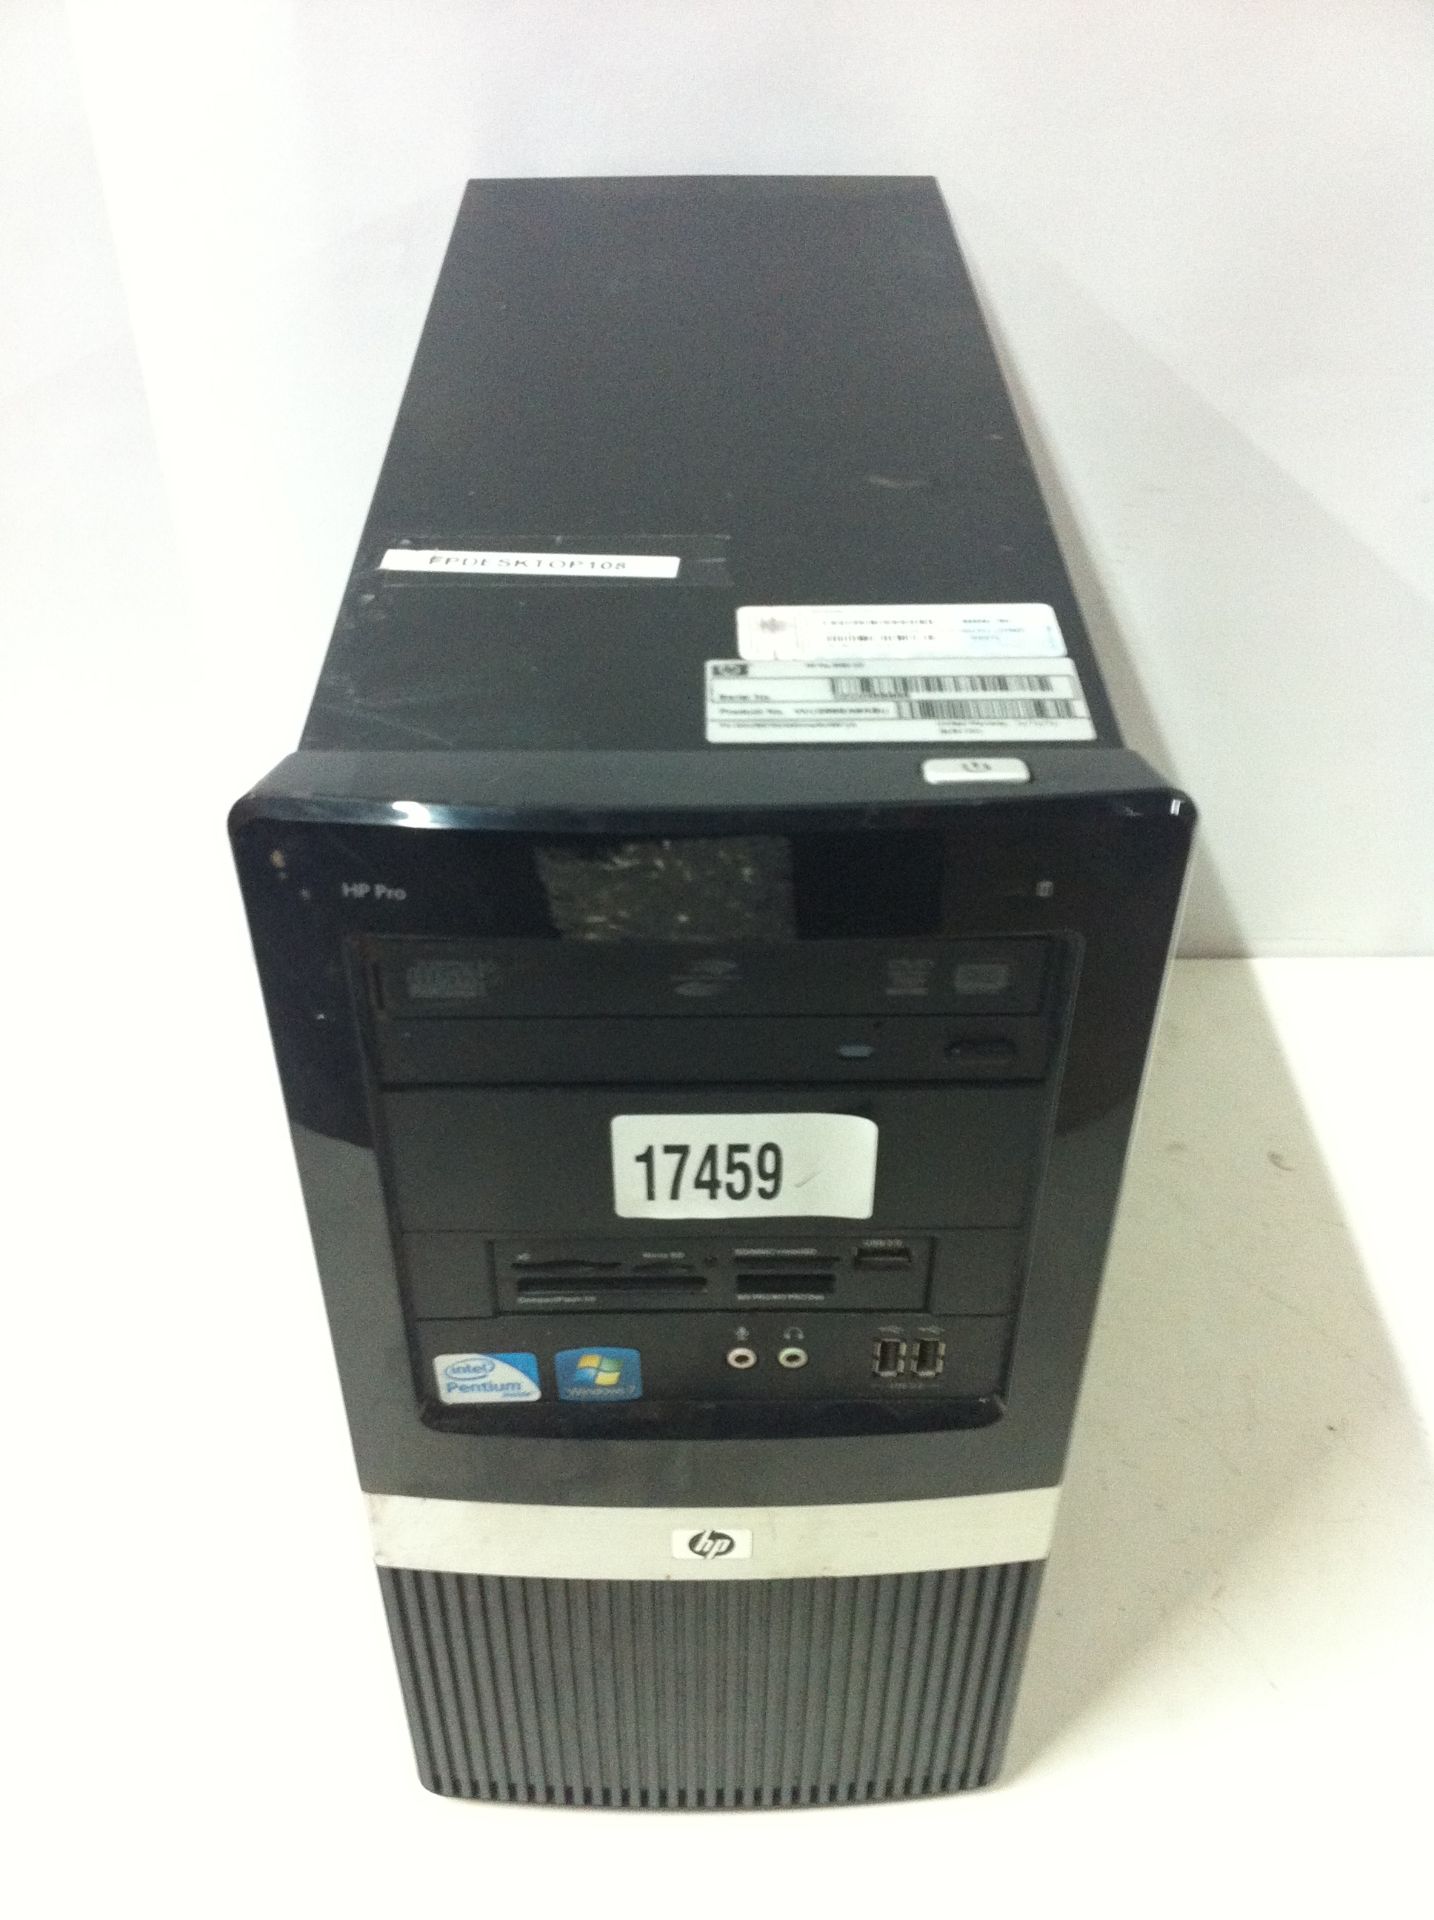 4 x HP Pro Desktop PC's, see description for specifications - Image 4 of 5